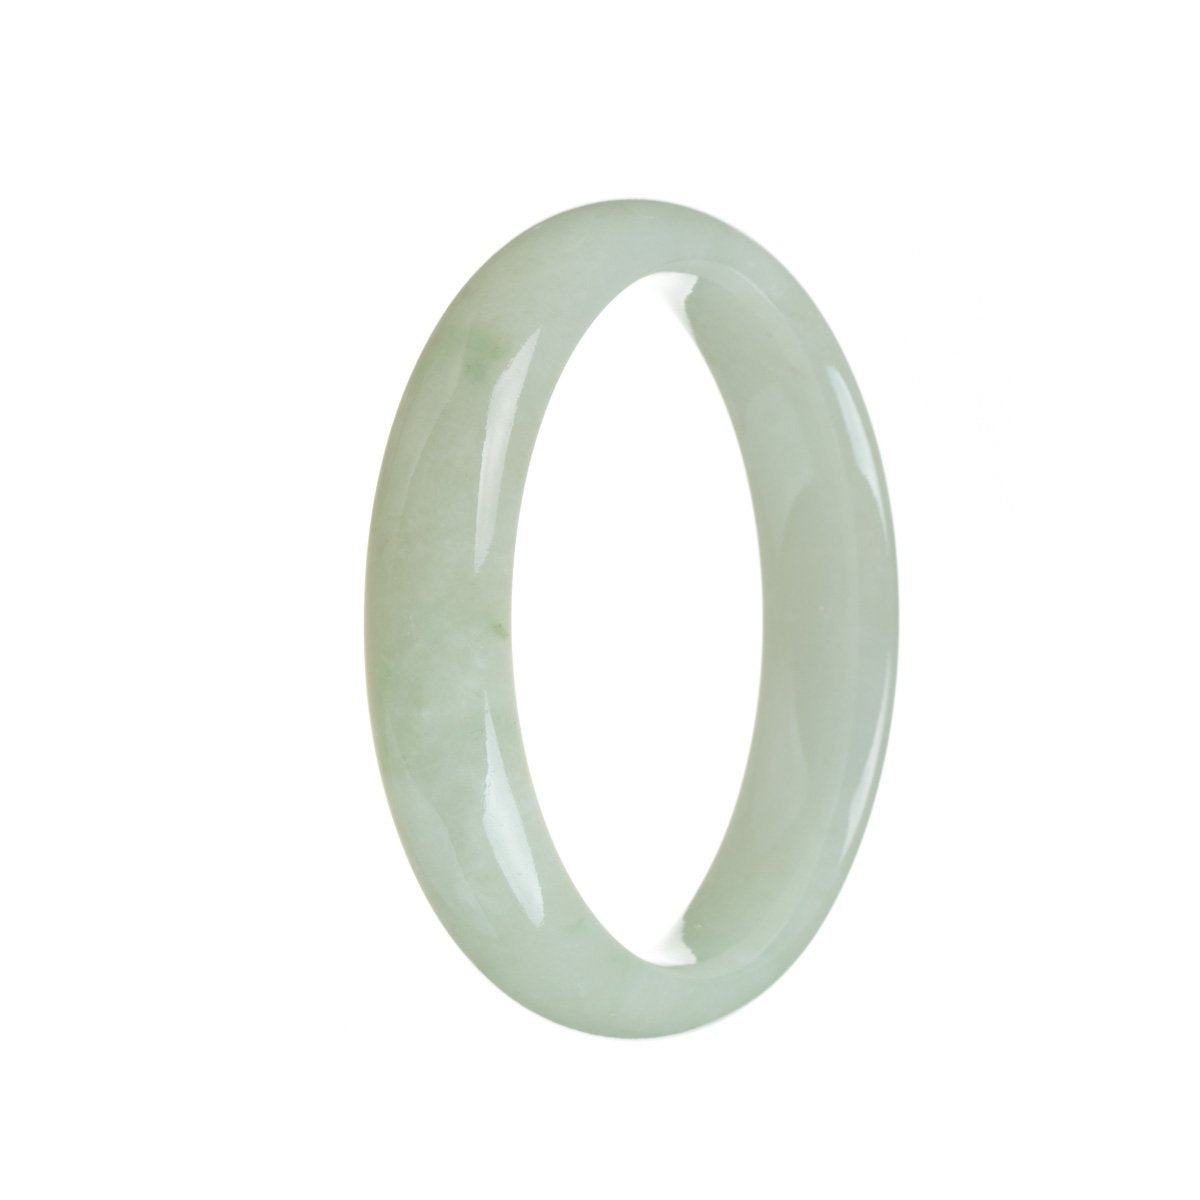 A close-up image of a white Burma jade bangle, half moon shaped, with a diameter of 56mm. The bangle is made of genuine Type A jade, displaying its beautiful and unique natural patterns. Sold by MAYS GEMS.